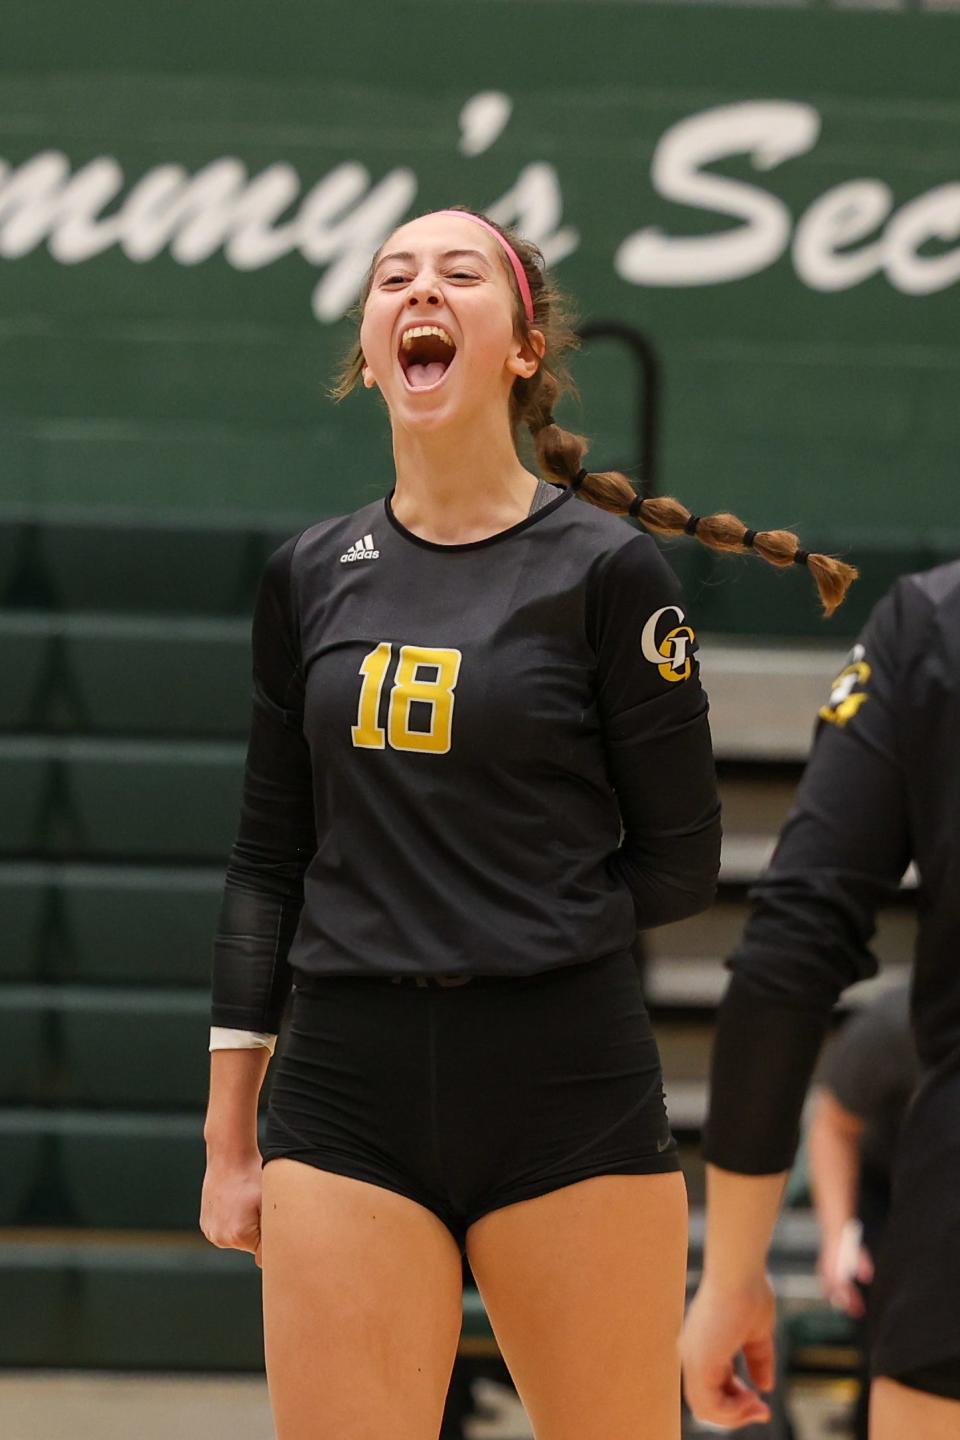 Garfield junior Madeline Shirkey celebrates after a point during Wednesday night’s Division III District Semifinal game against Lake Center Christian High School in Medina.